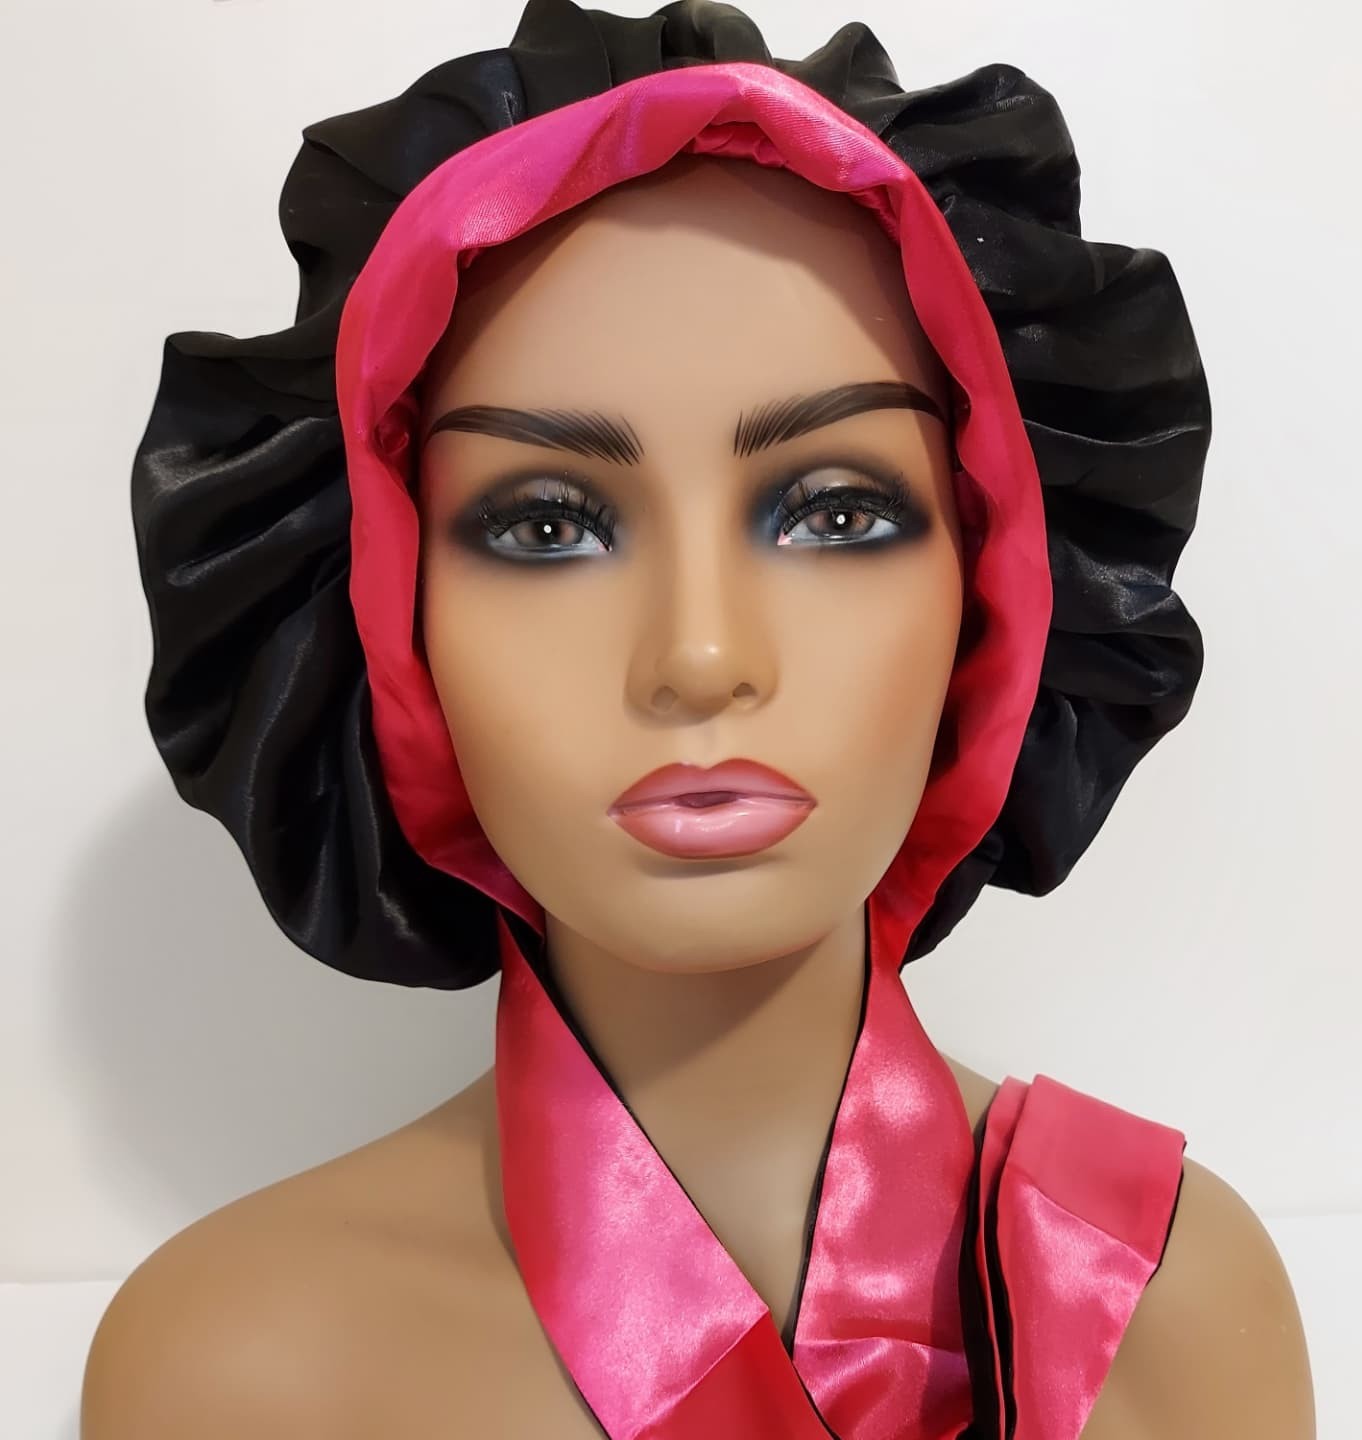 Silk Satin Hair Bonnet For Sleeping at Night That Keep Your Hair Protected